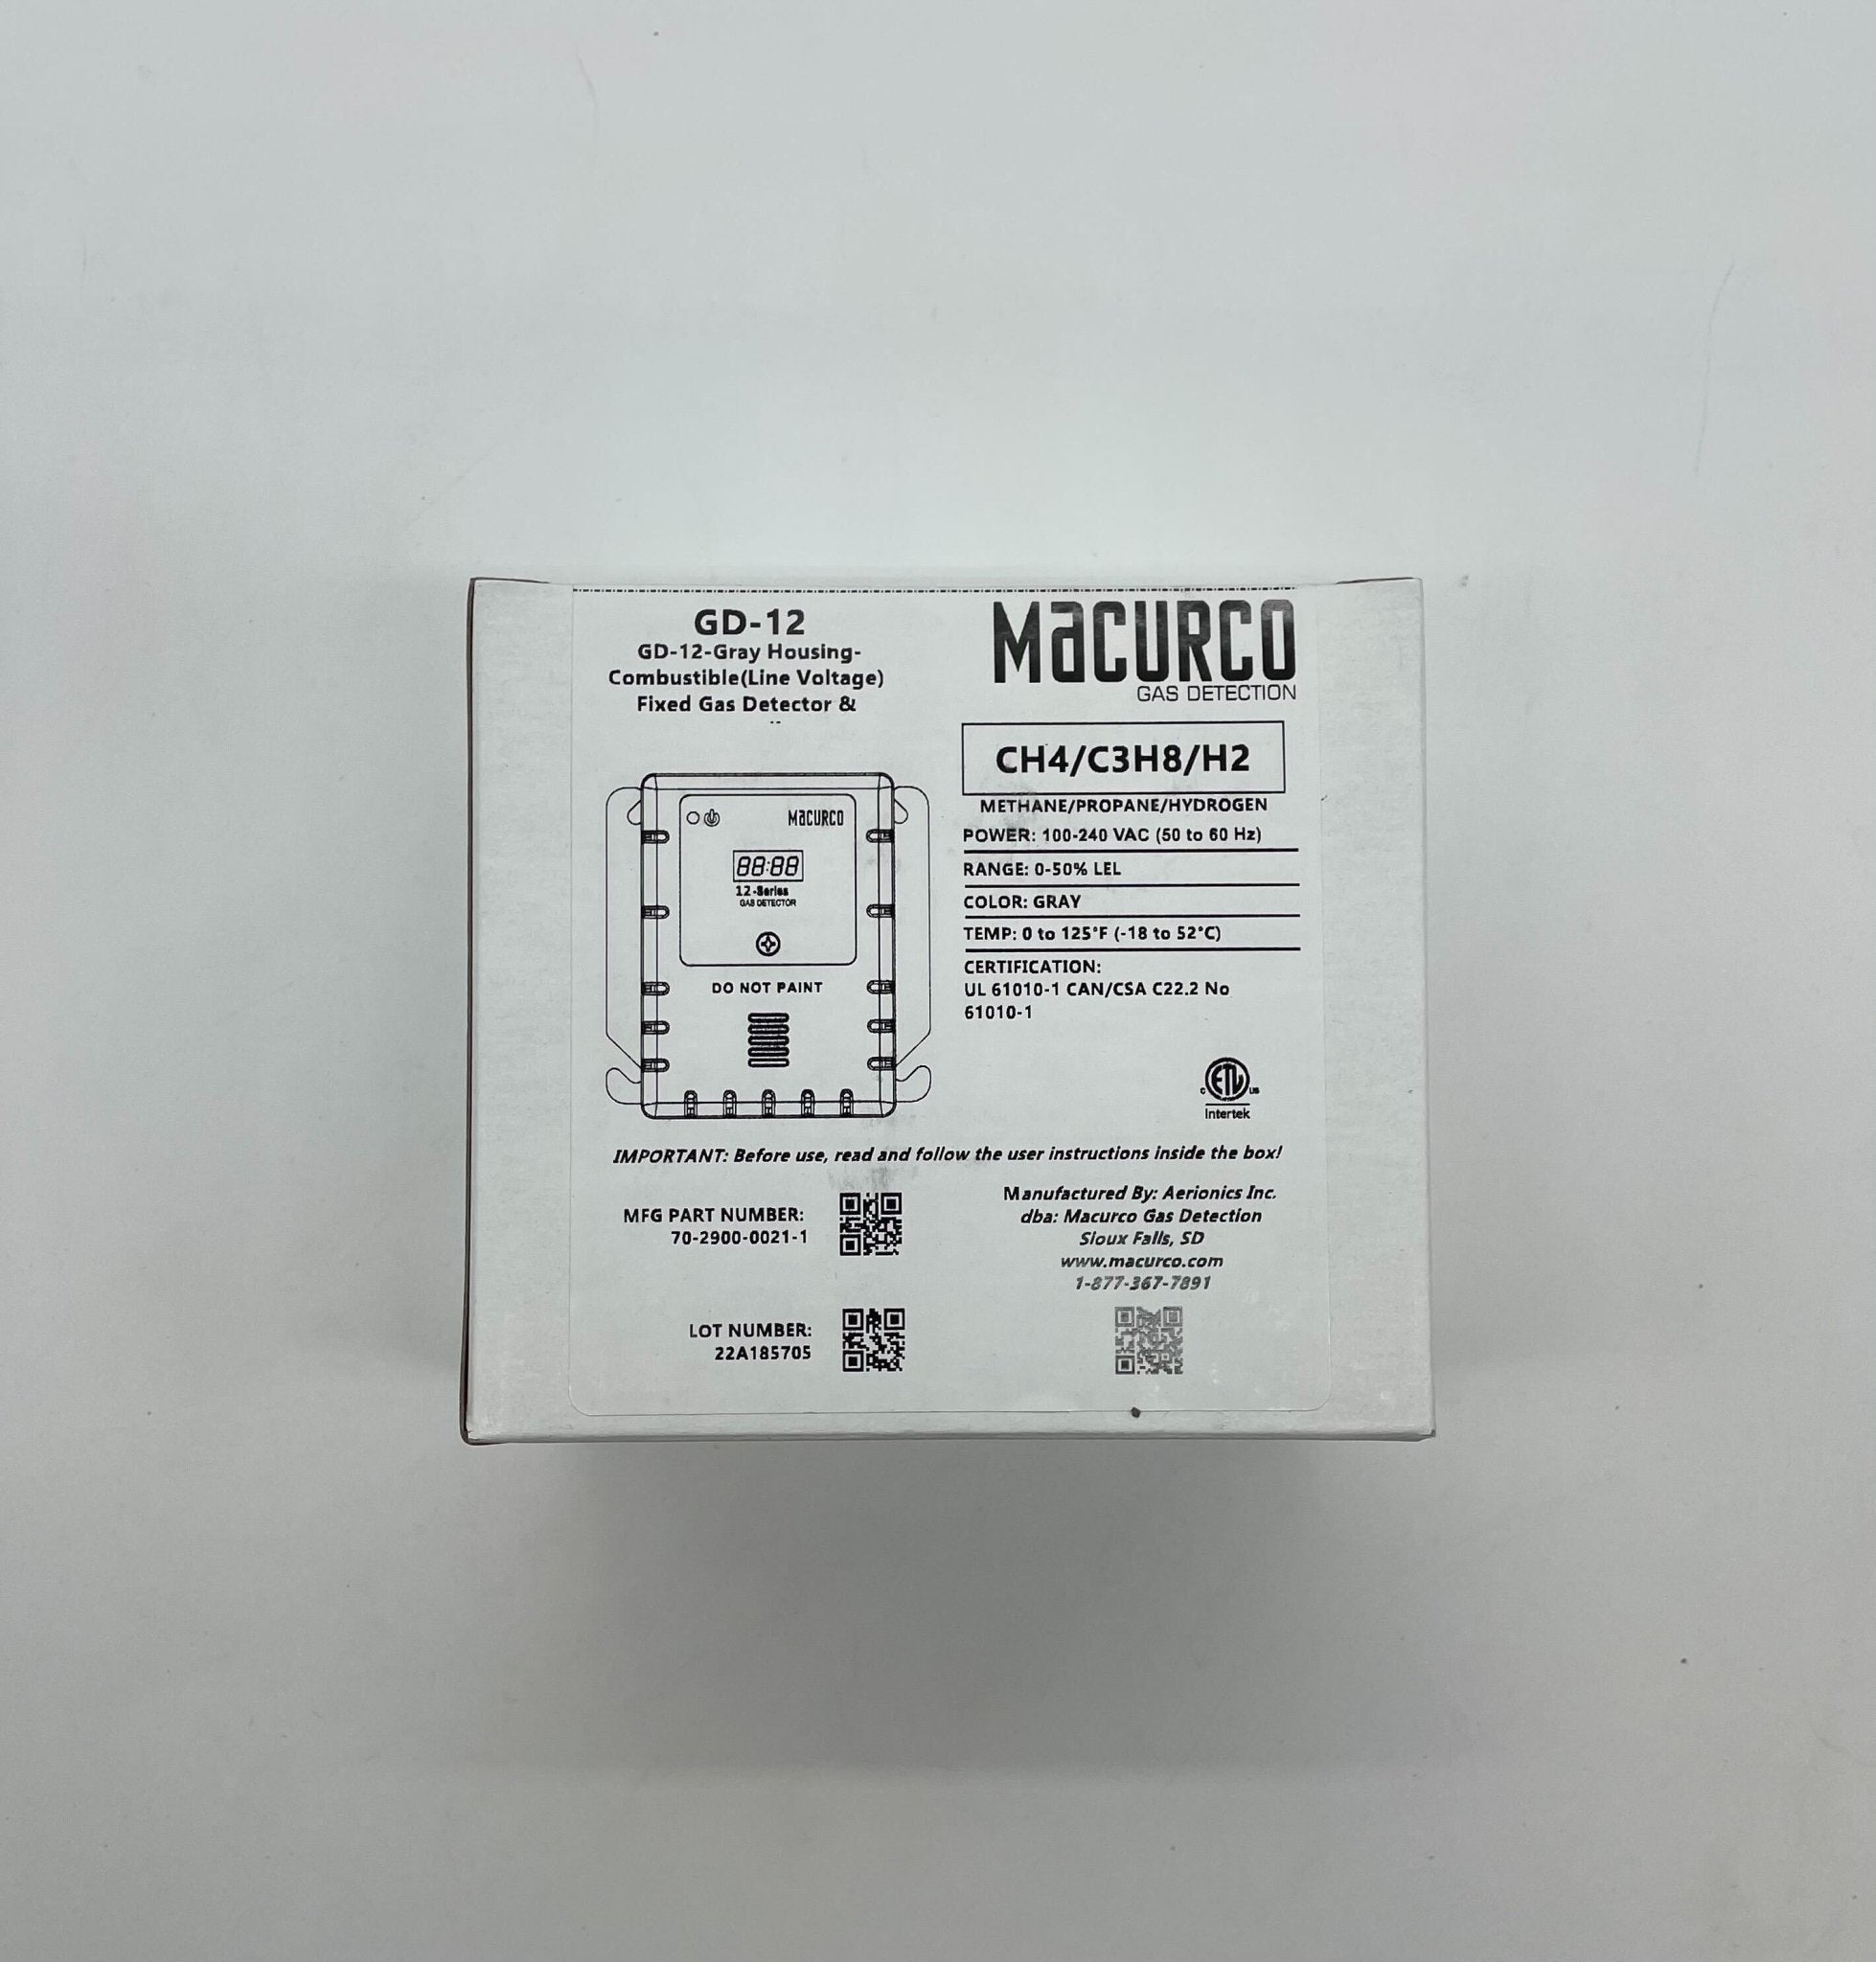 Macurco GD-12 - The Fire Alarm Supplier